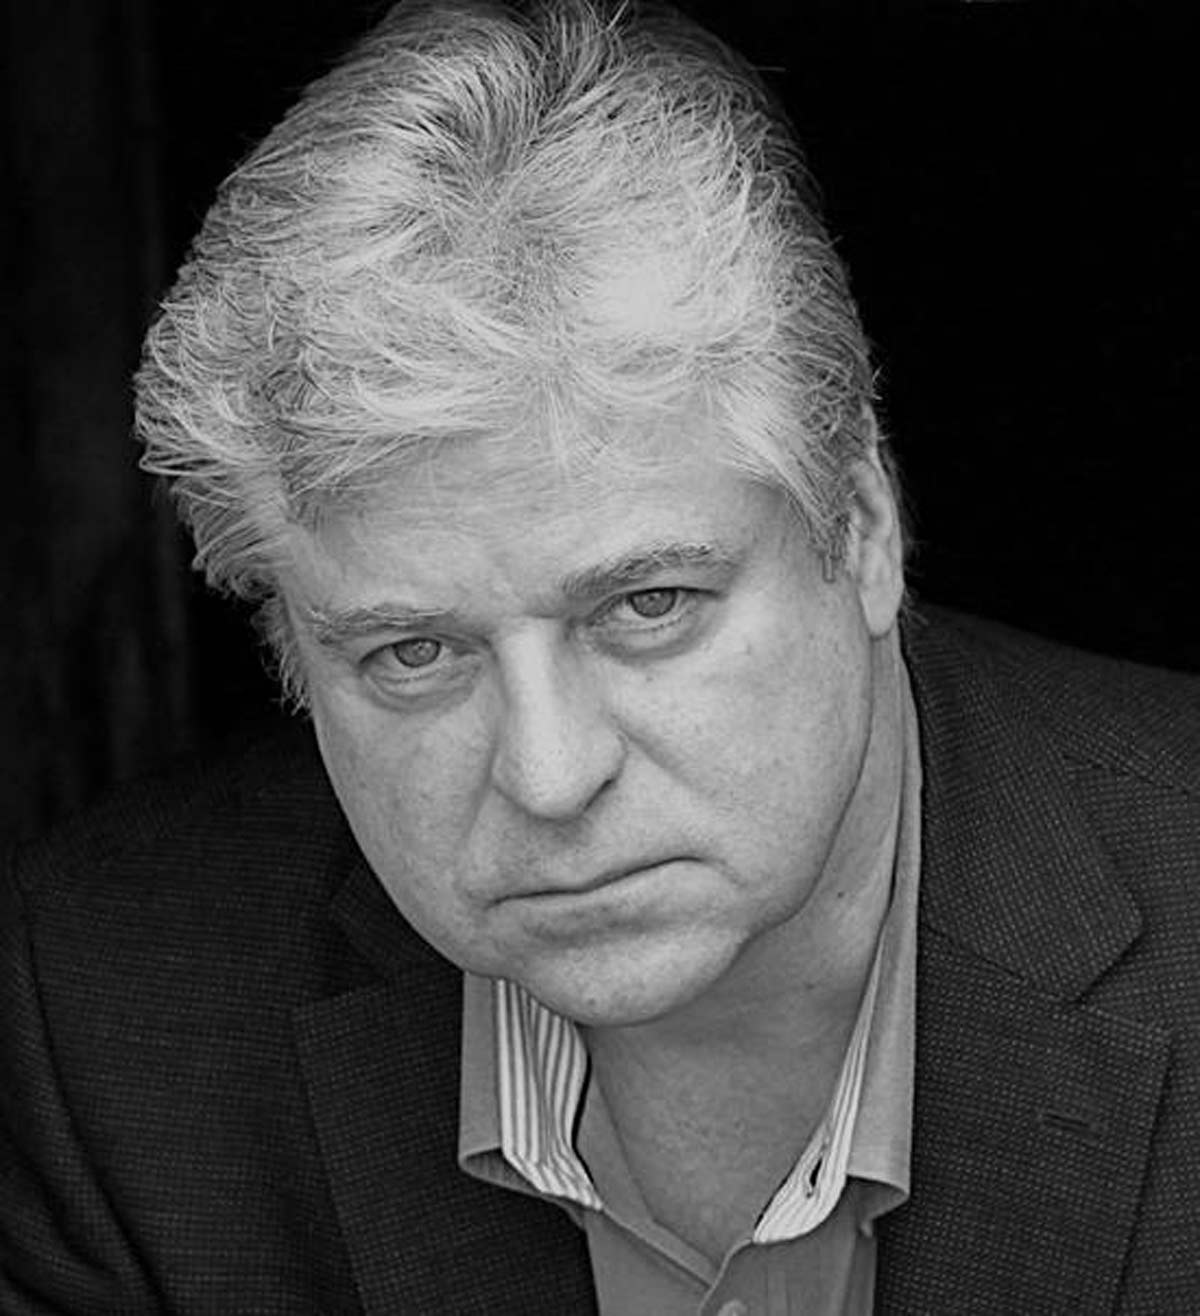 Canadian author Linwood Barclay is jetting to Harrogate